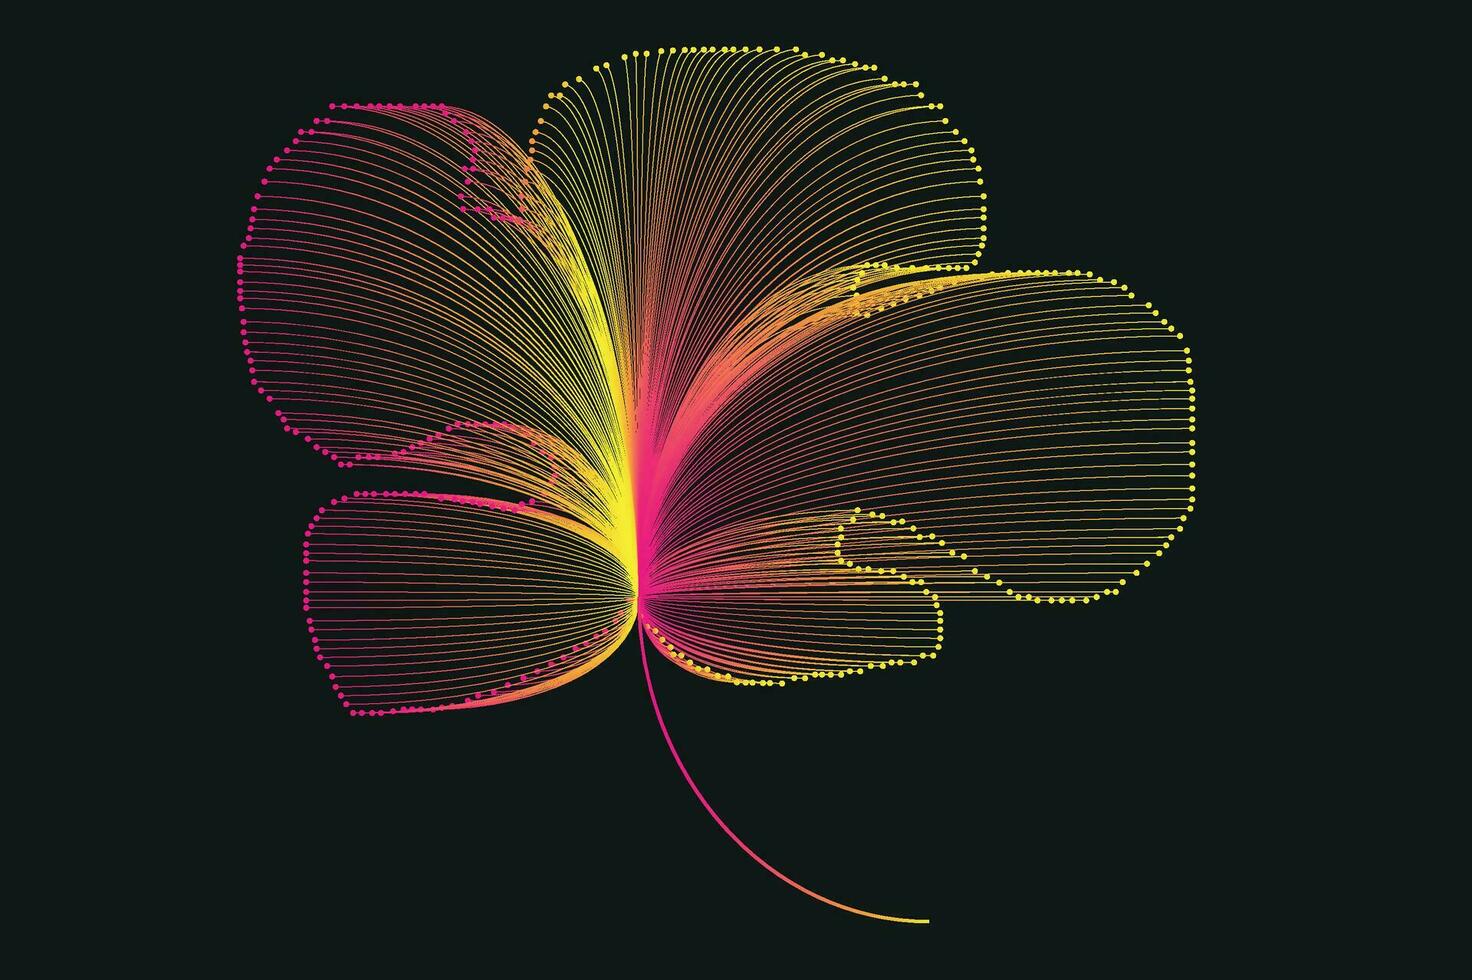 Abstract line art neon gradient vector design in the shape of a flower